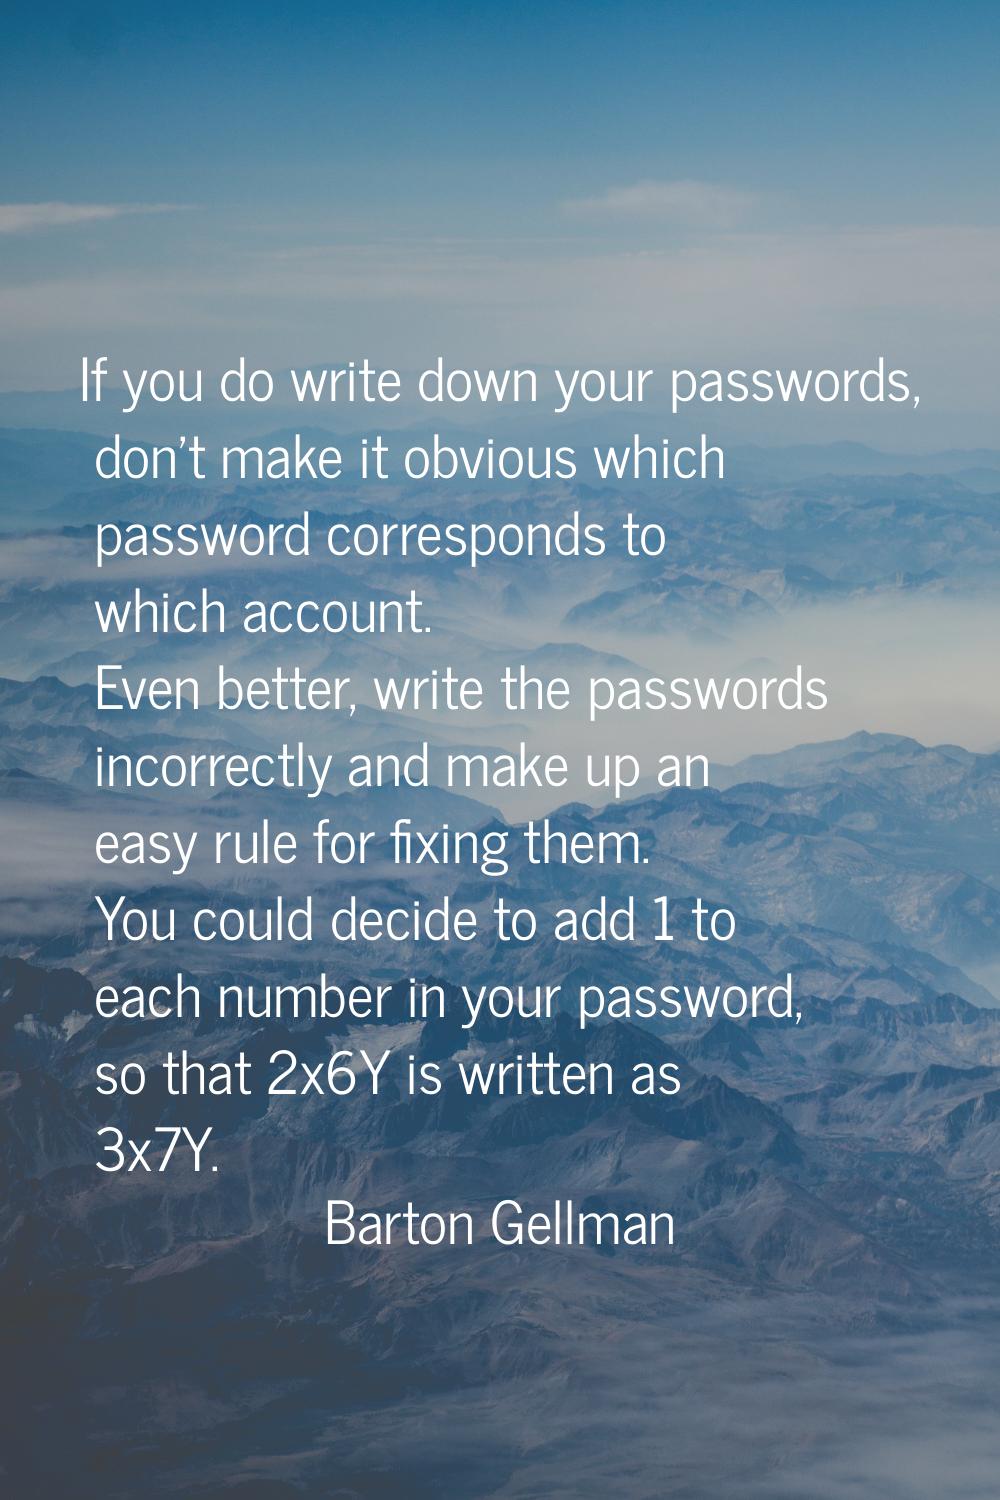 If you do write down your passwords, don't make it obvious which password corresponds to which acco